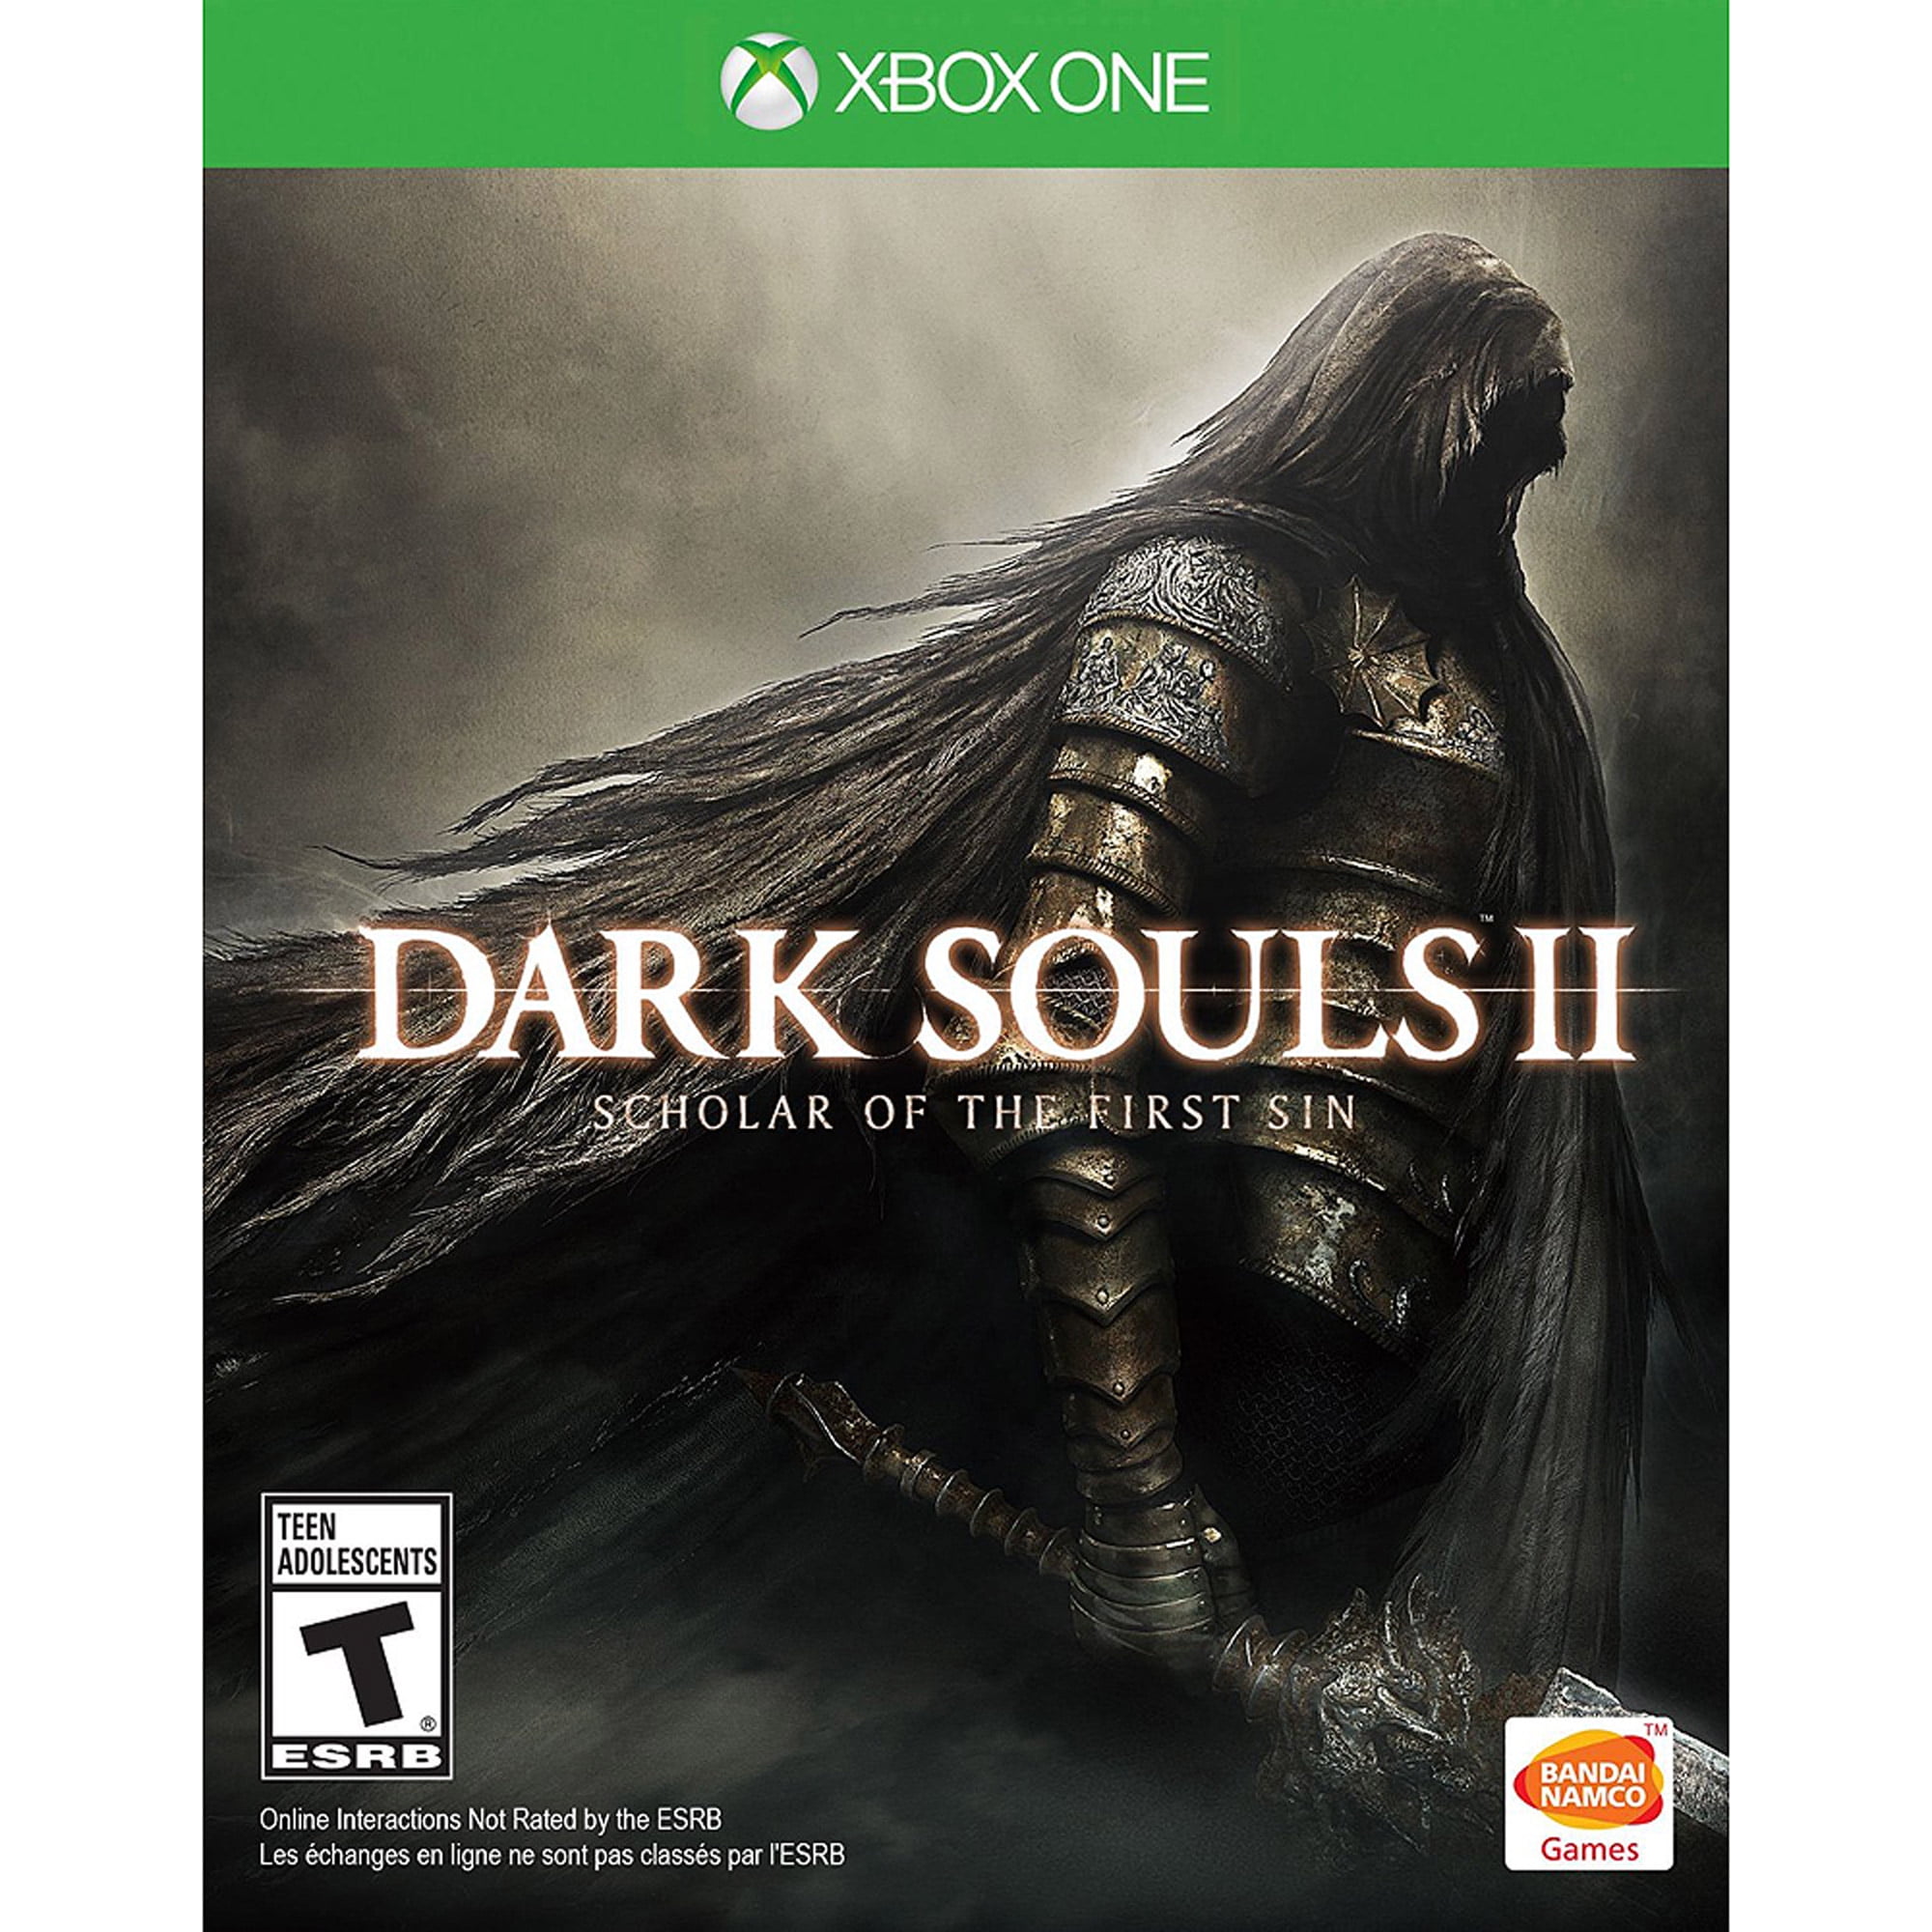 Dark Souls II: Crown of the Old Iron King - release date, videos